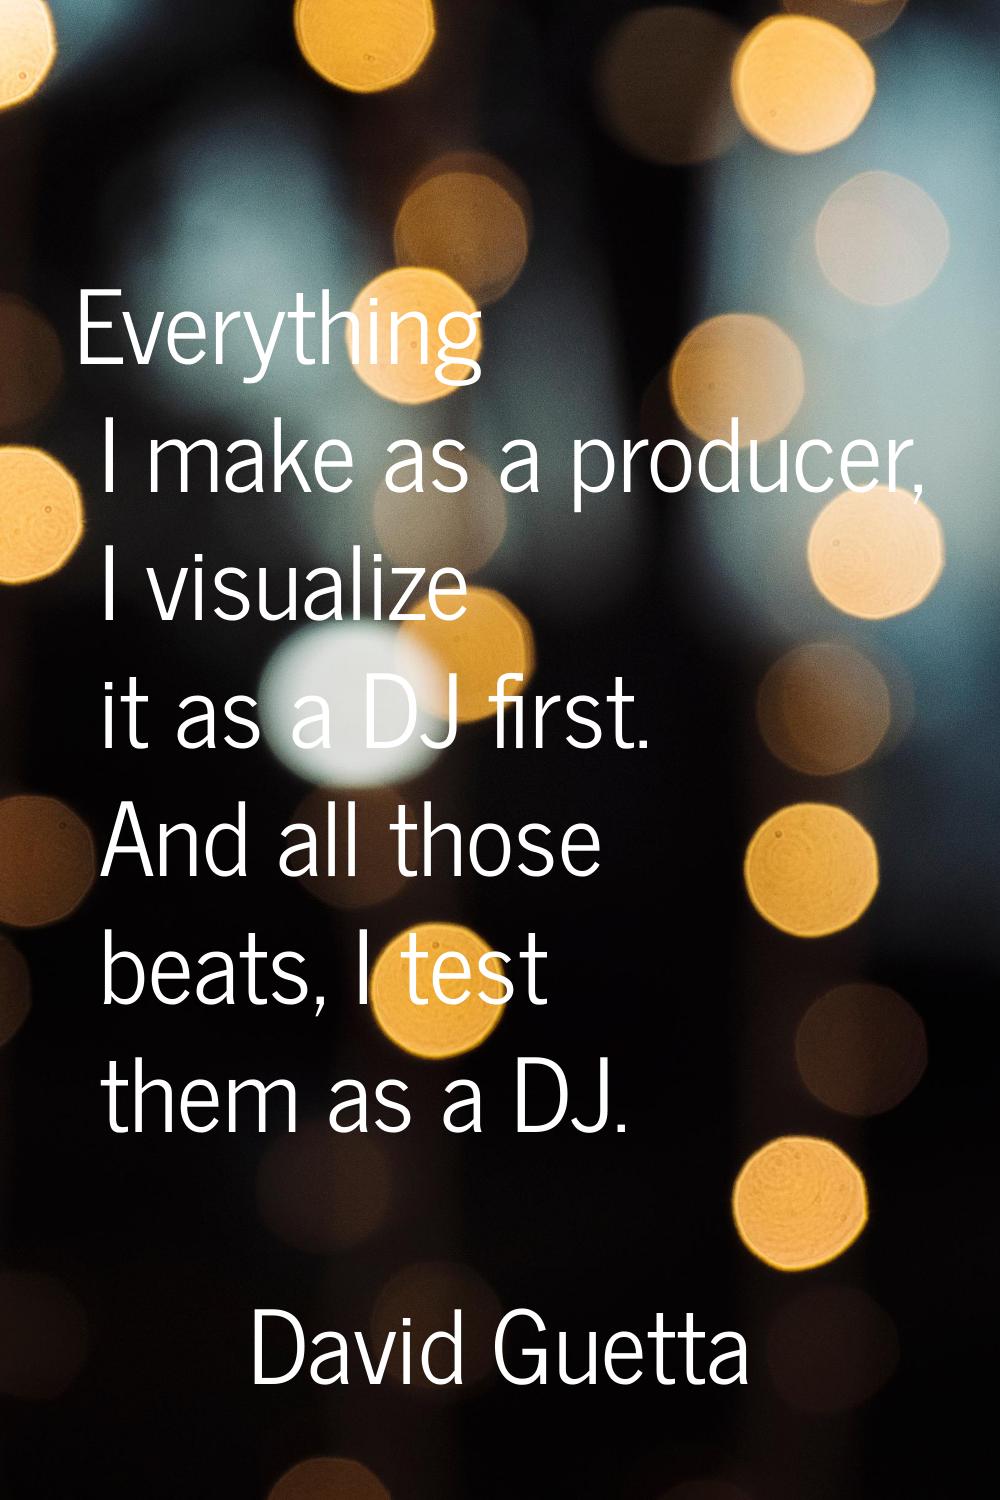 Everything I make as a producer, I visualize it as a DJ first. And all those beats, I test them as 